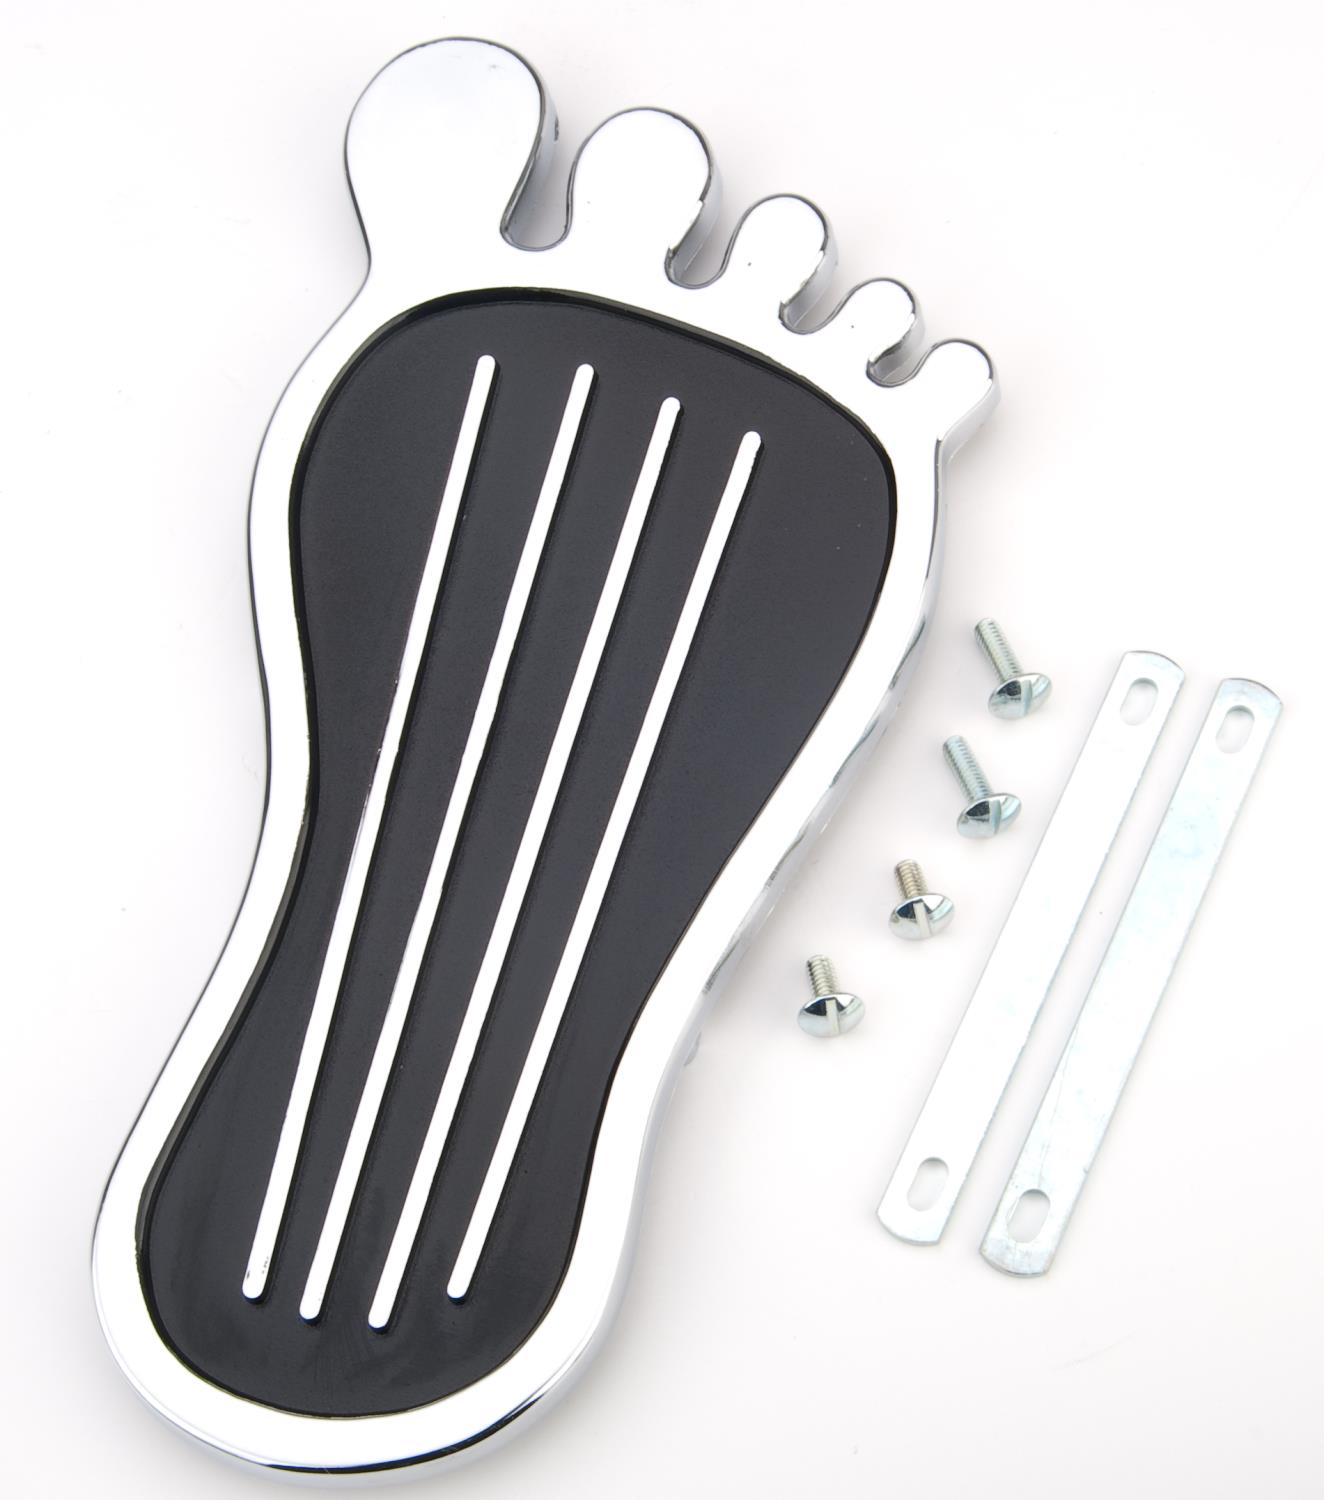 "Foot" Gas Pedal Cover Fits accelerator pedals up to 2" wide